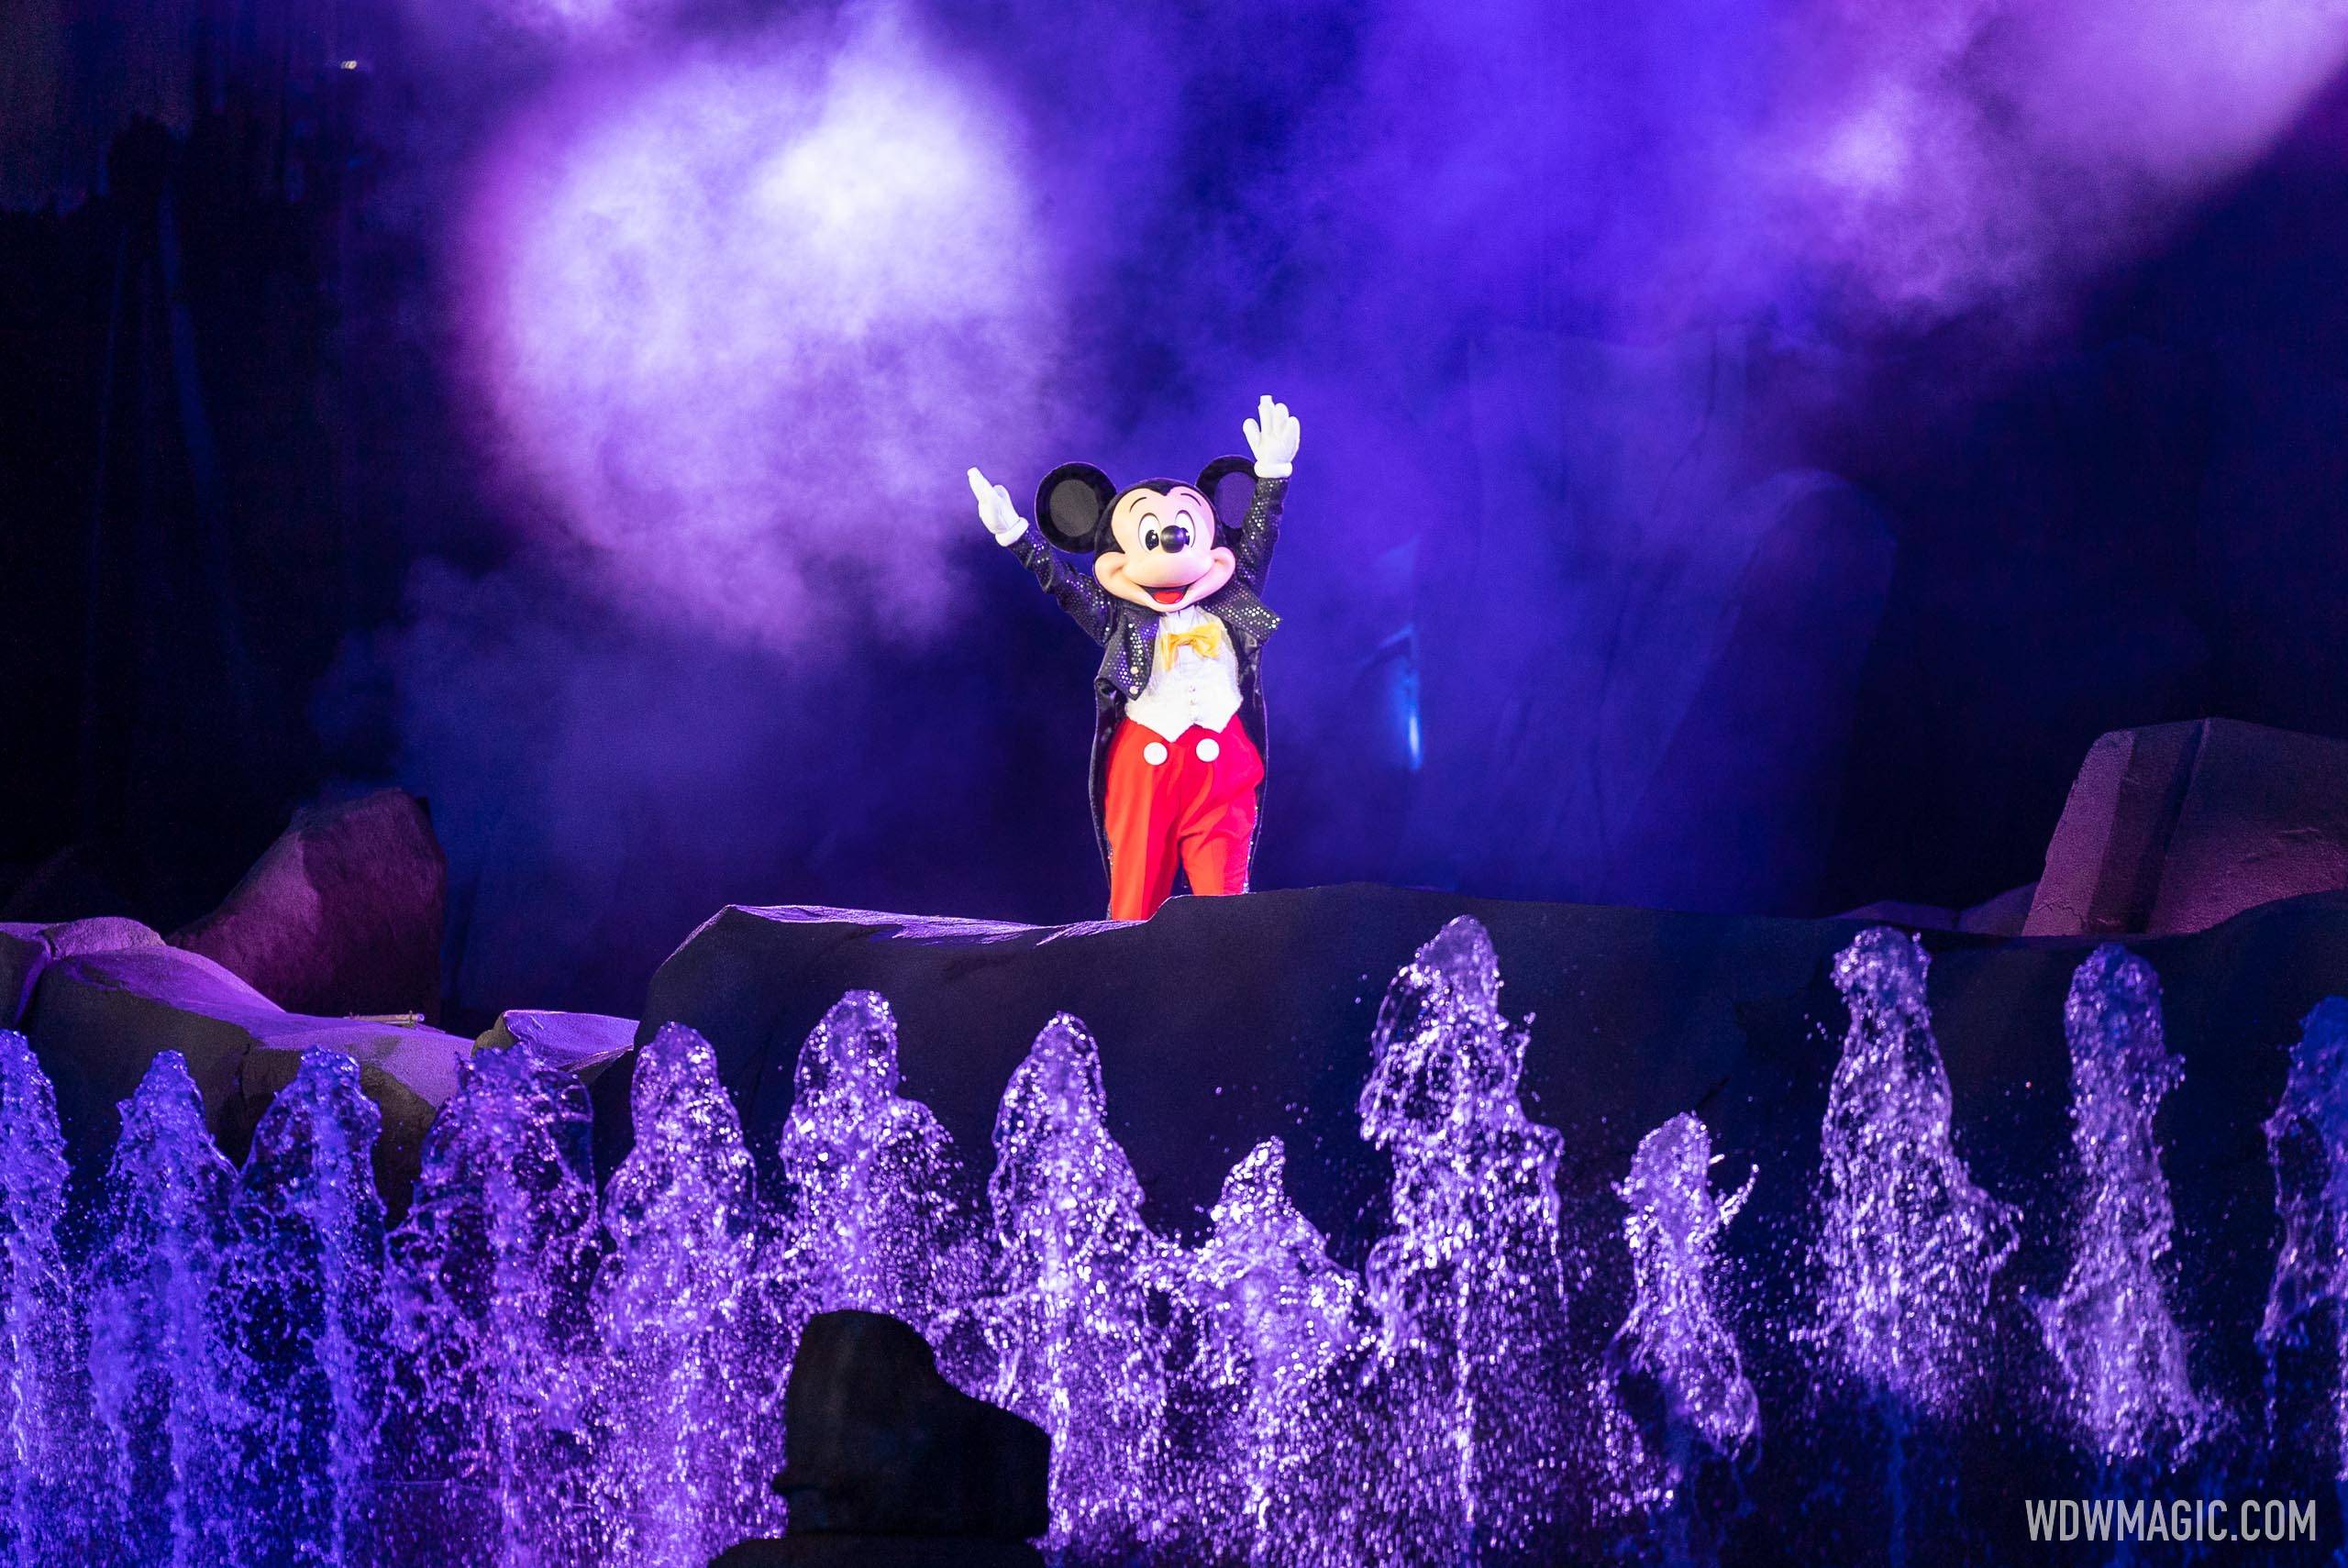 Fantasmic! will return at Walt Disney World with an all-new sequence in 2022